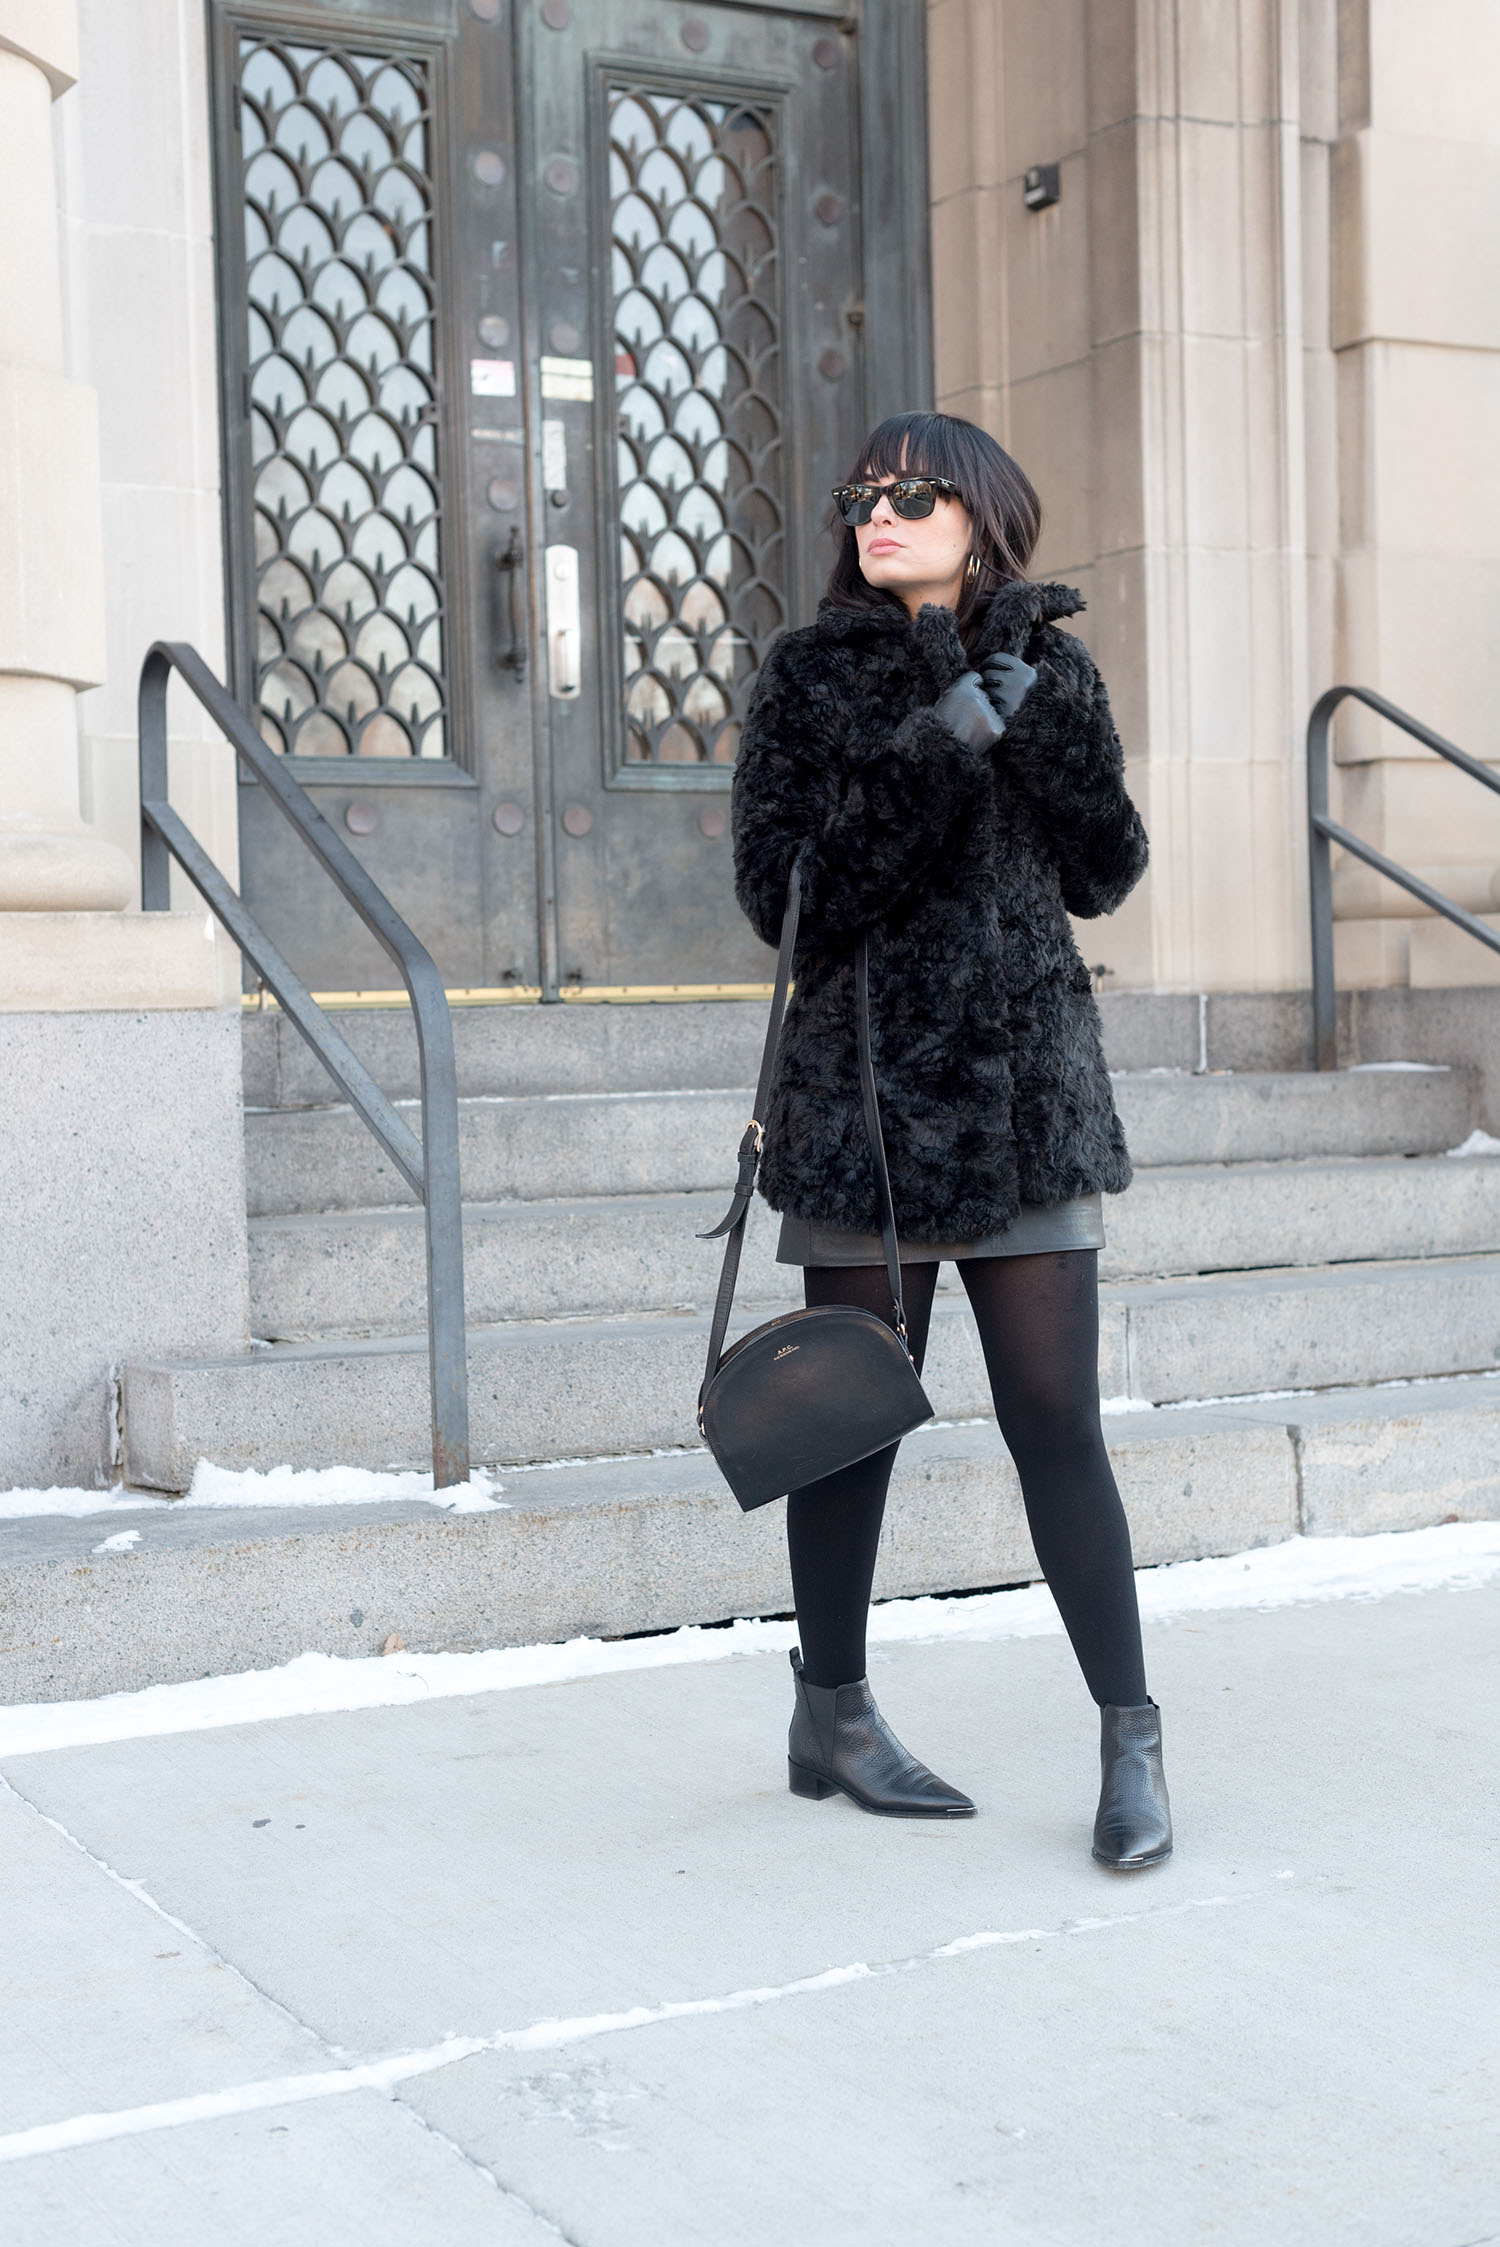 Top Canadian fashion blogger Cee Fardoe of Coco & Vera wears Acne Studios Jensen boots and carries and APC half-moon bag